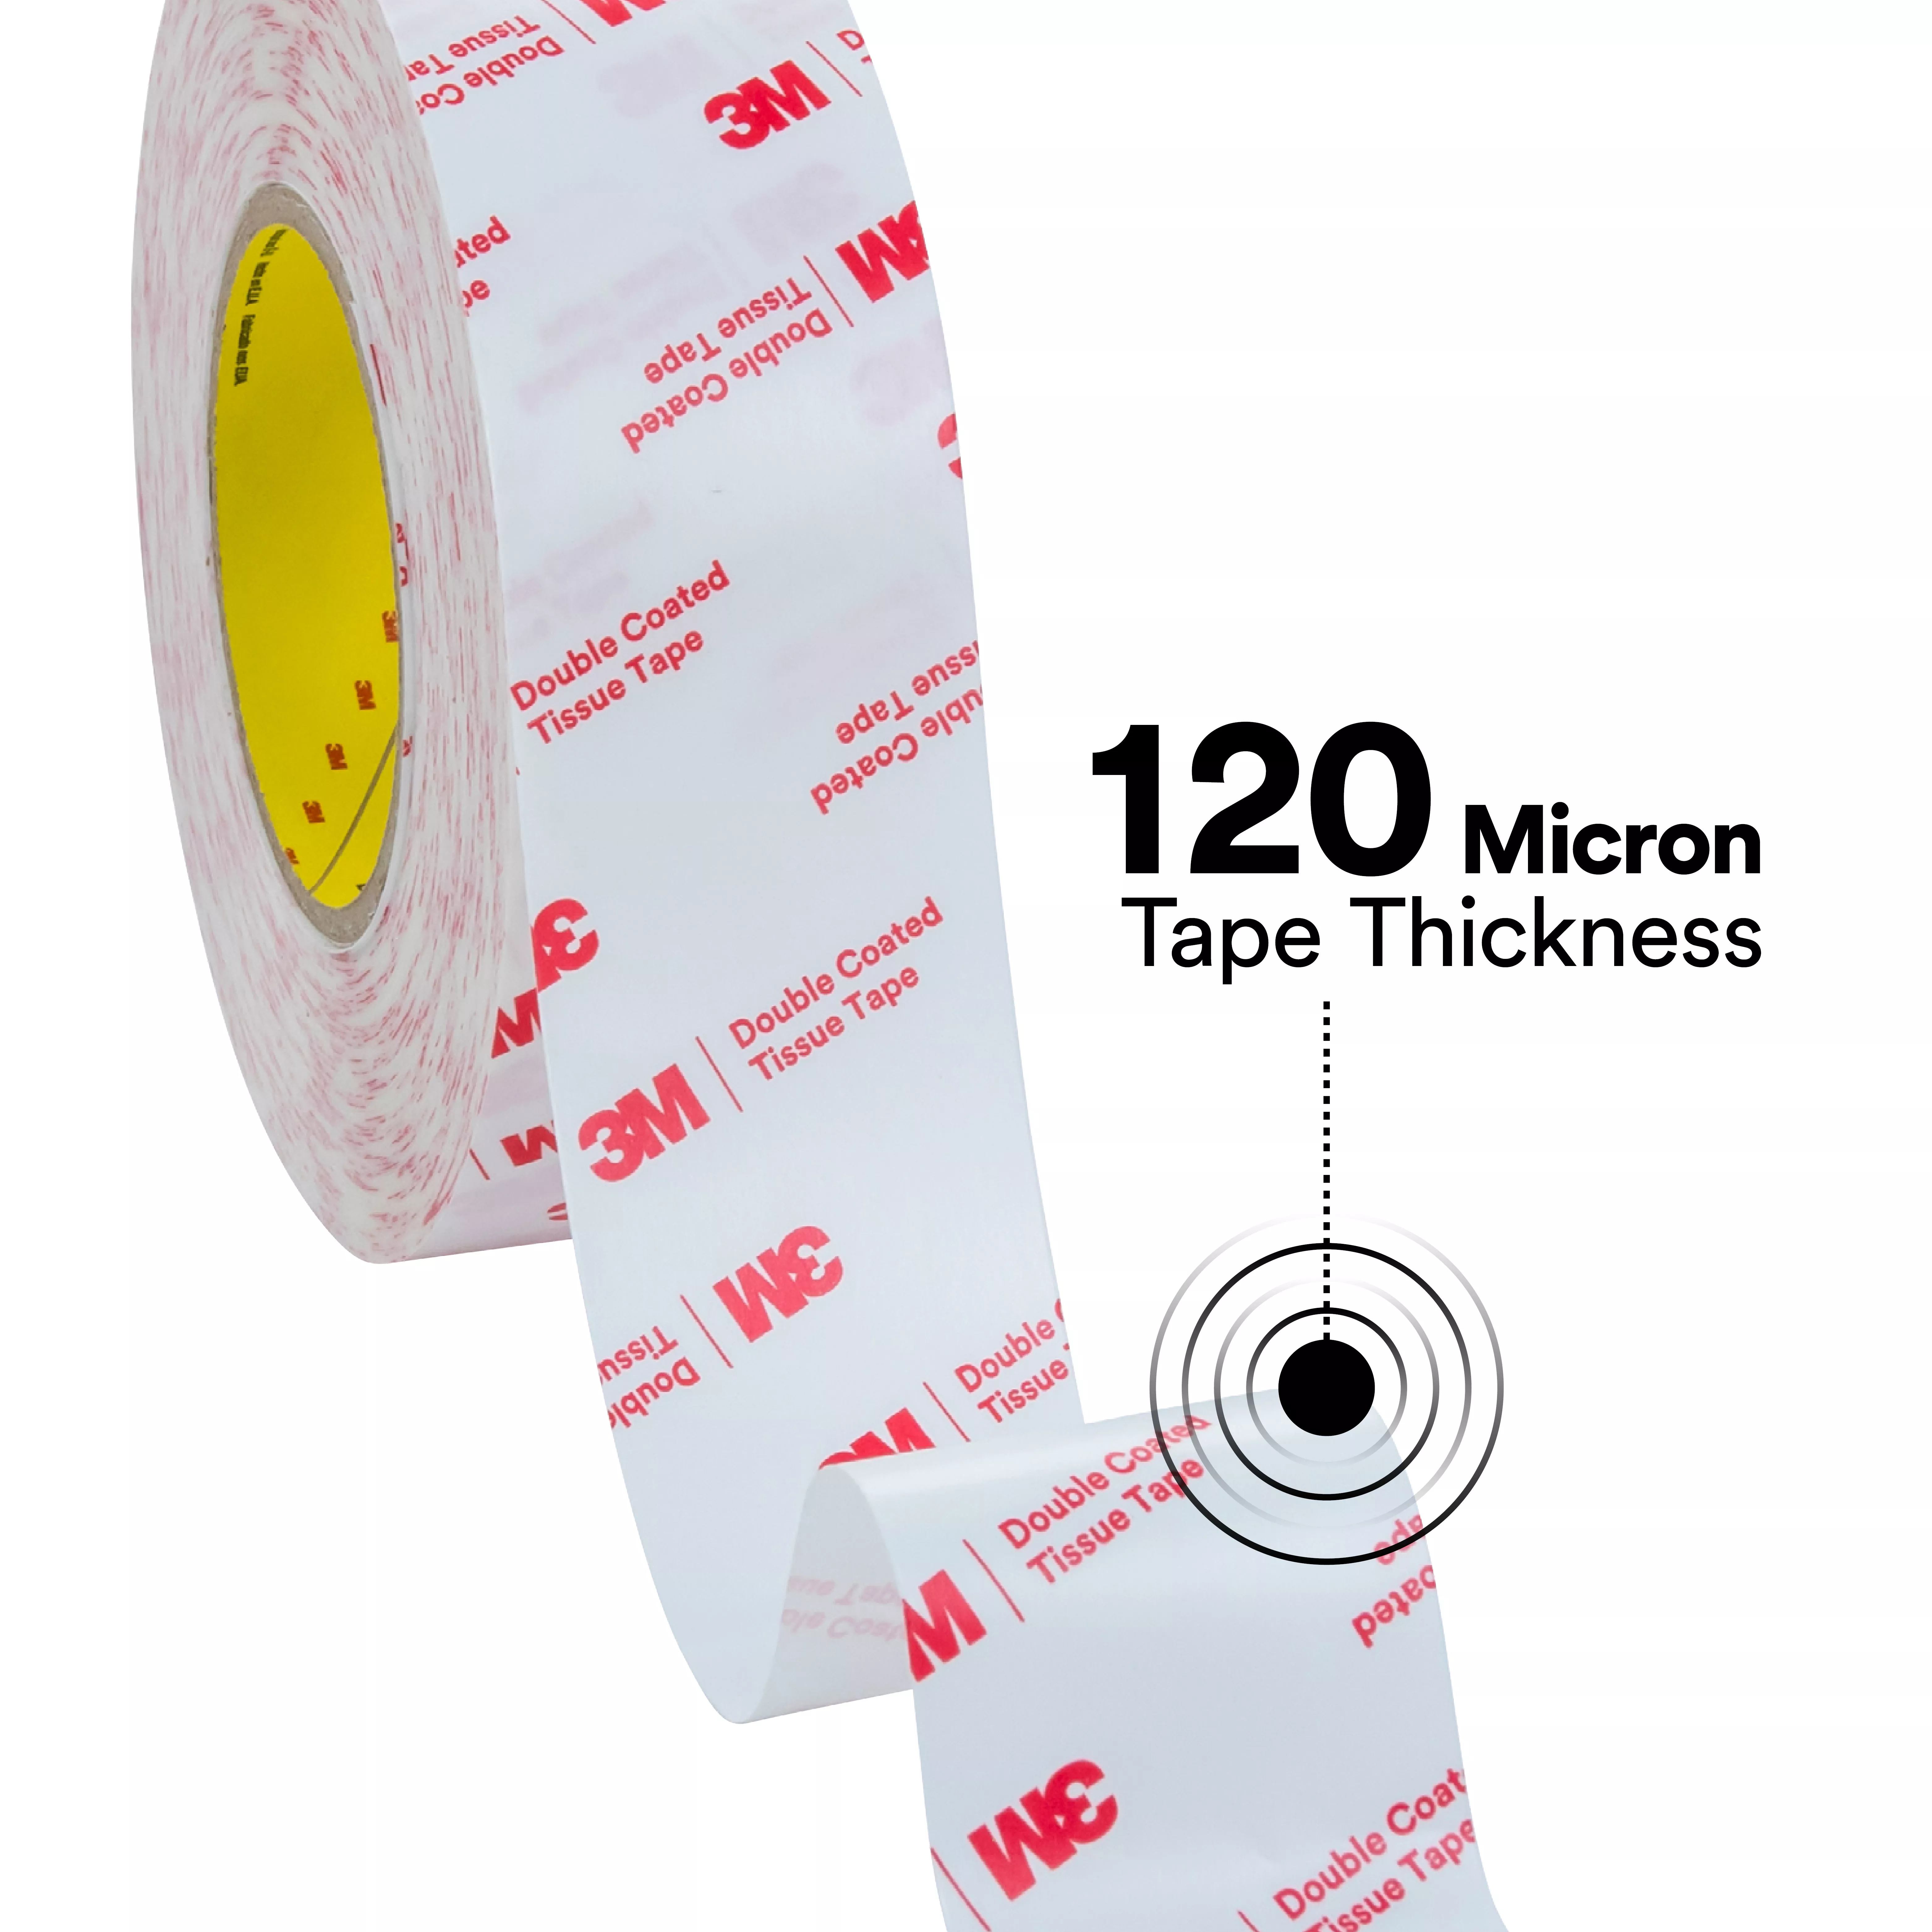 SKU 7100283869 | 3M™ Double Coated Tissue Tape 56212